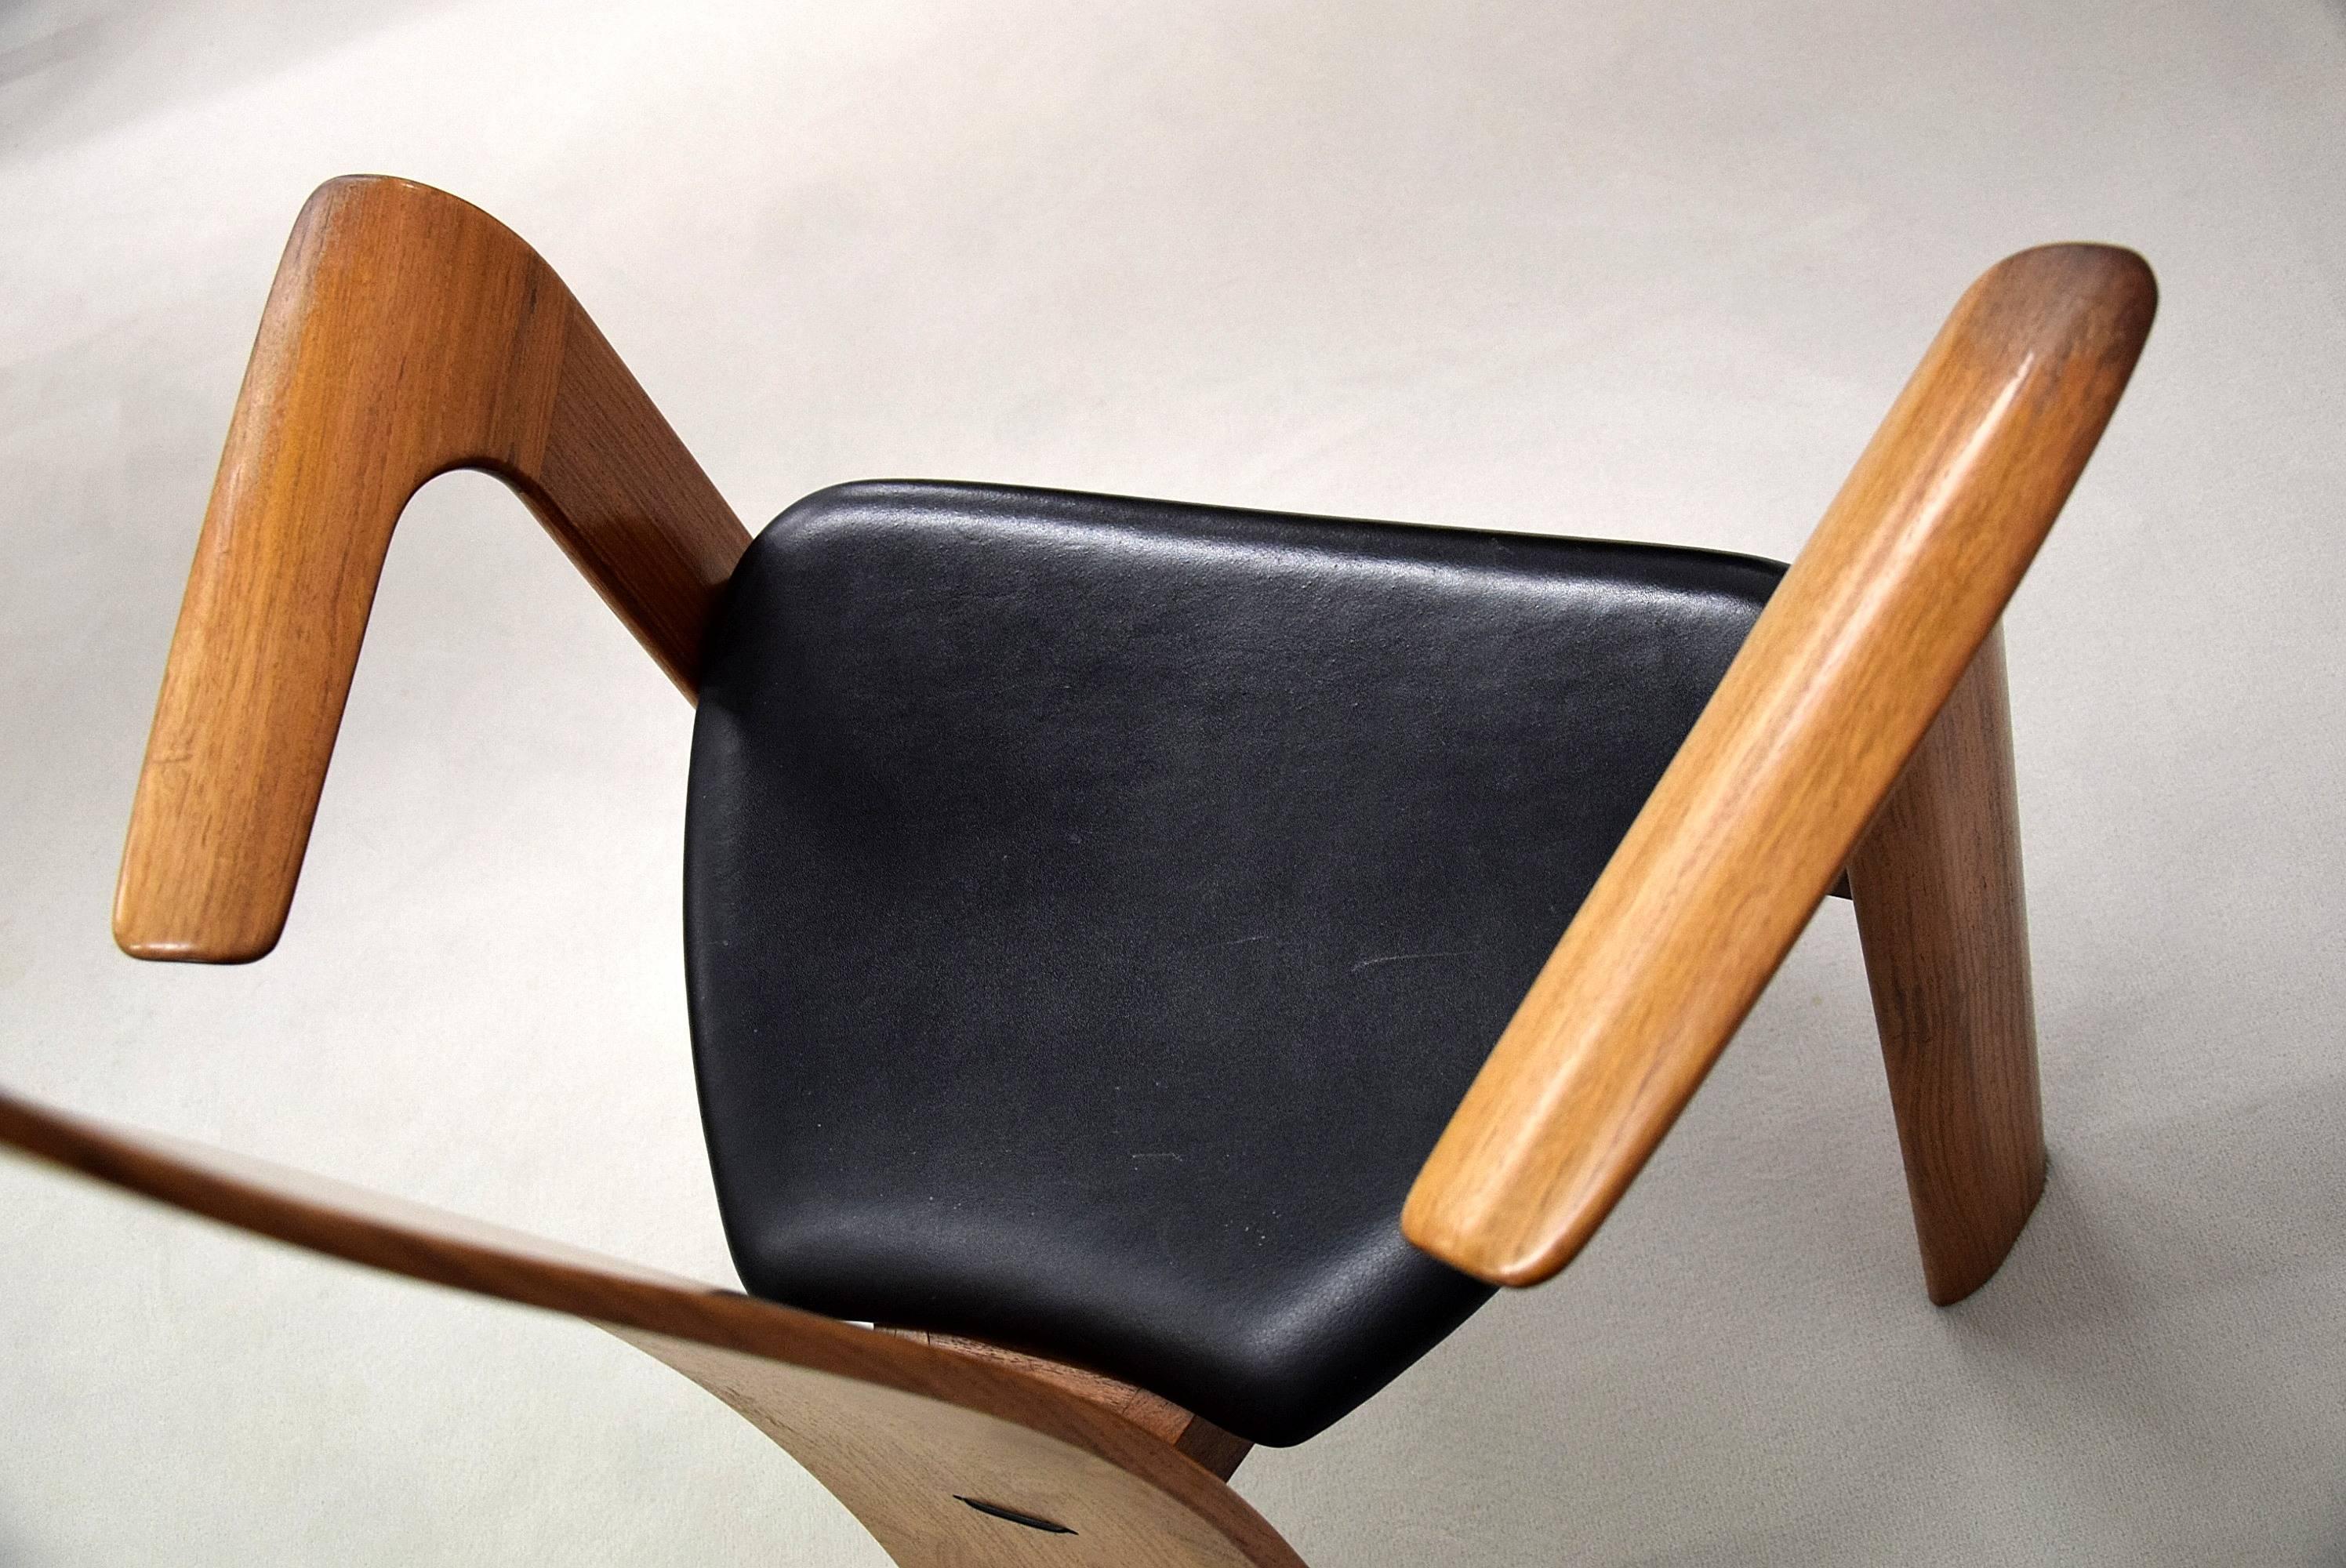 Elegant and stylish midcentury Afromosia (African teak) and leather chair designed by Bob og Dries van den Bergh for Tranekær Mobler, Denmark.

This spectacular design is a jewel in any environment. The chair is in excellent condition.

Measurements